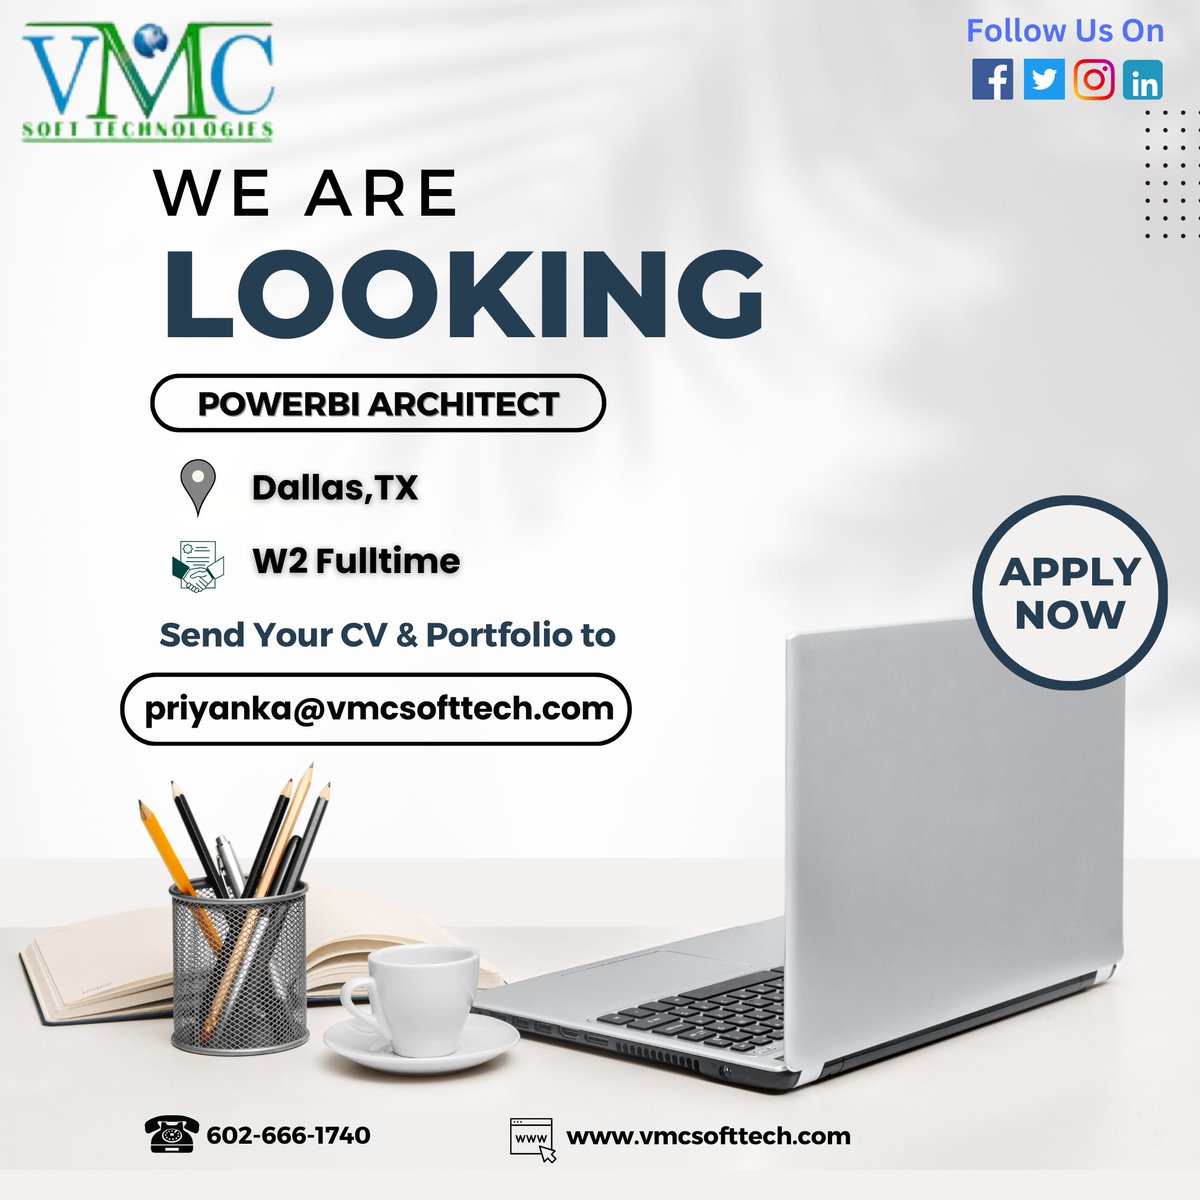 VMC Soft Technologies looking for a PowerBI Architect in Dallas,TX Job Title: PowerBI Architect Locations: Dallas,TX Contract: W2 Full-Time For more details: priyanka@vmcsofttech.com/ 602-666-1740 #powerbi #microsoft #businessintelligence #excel #dataanalytics #datascience